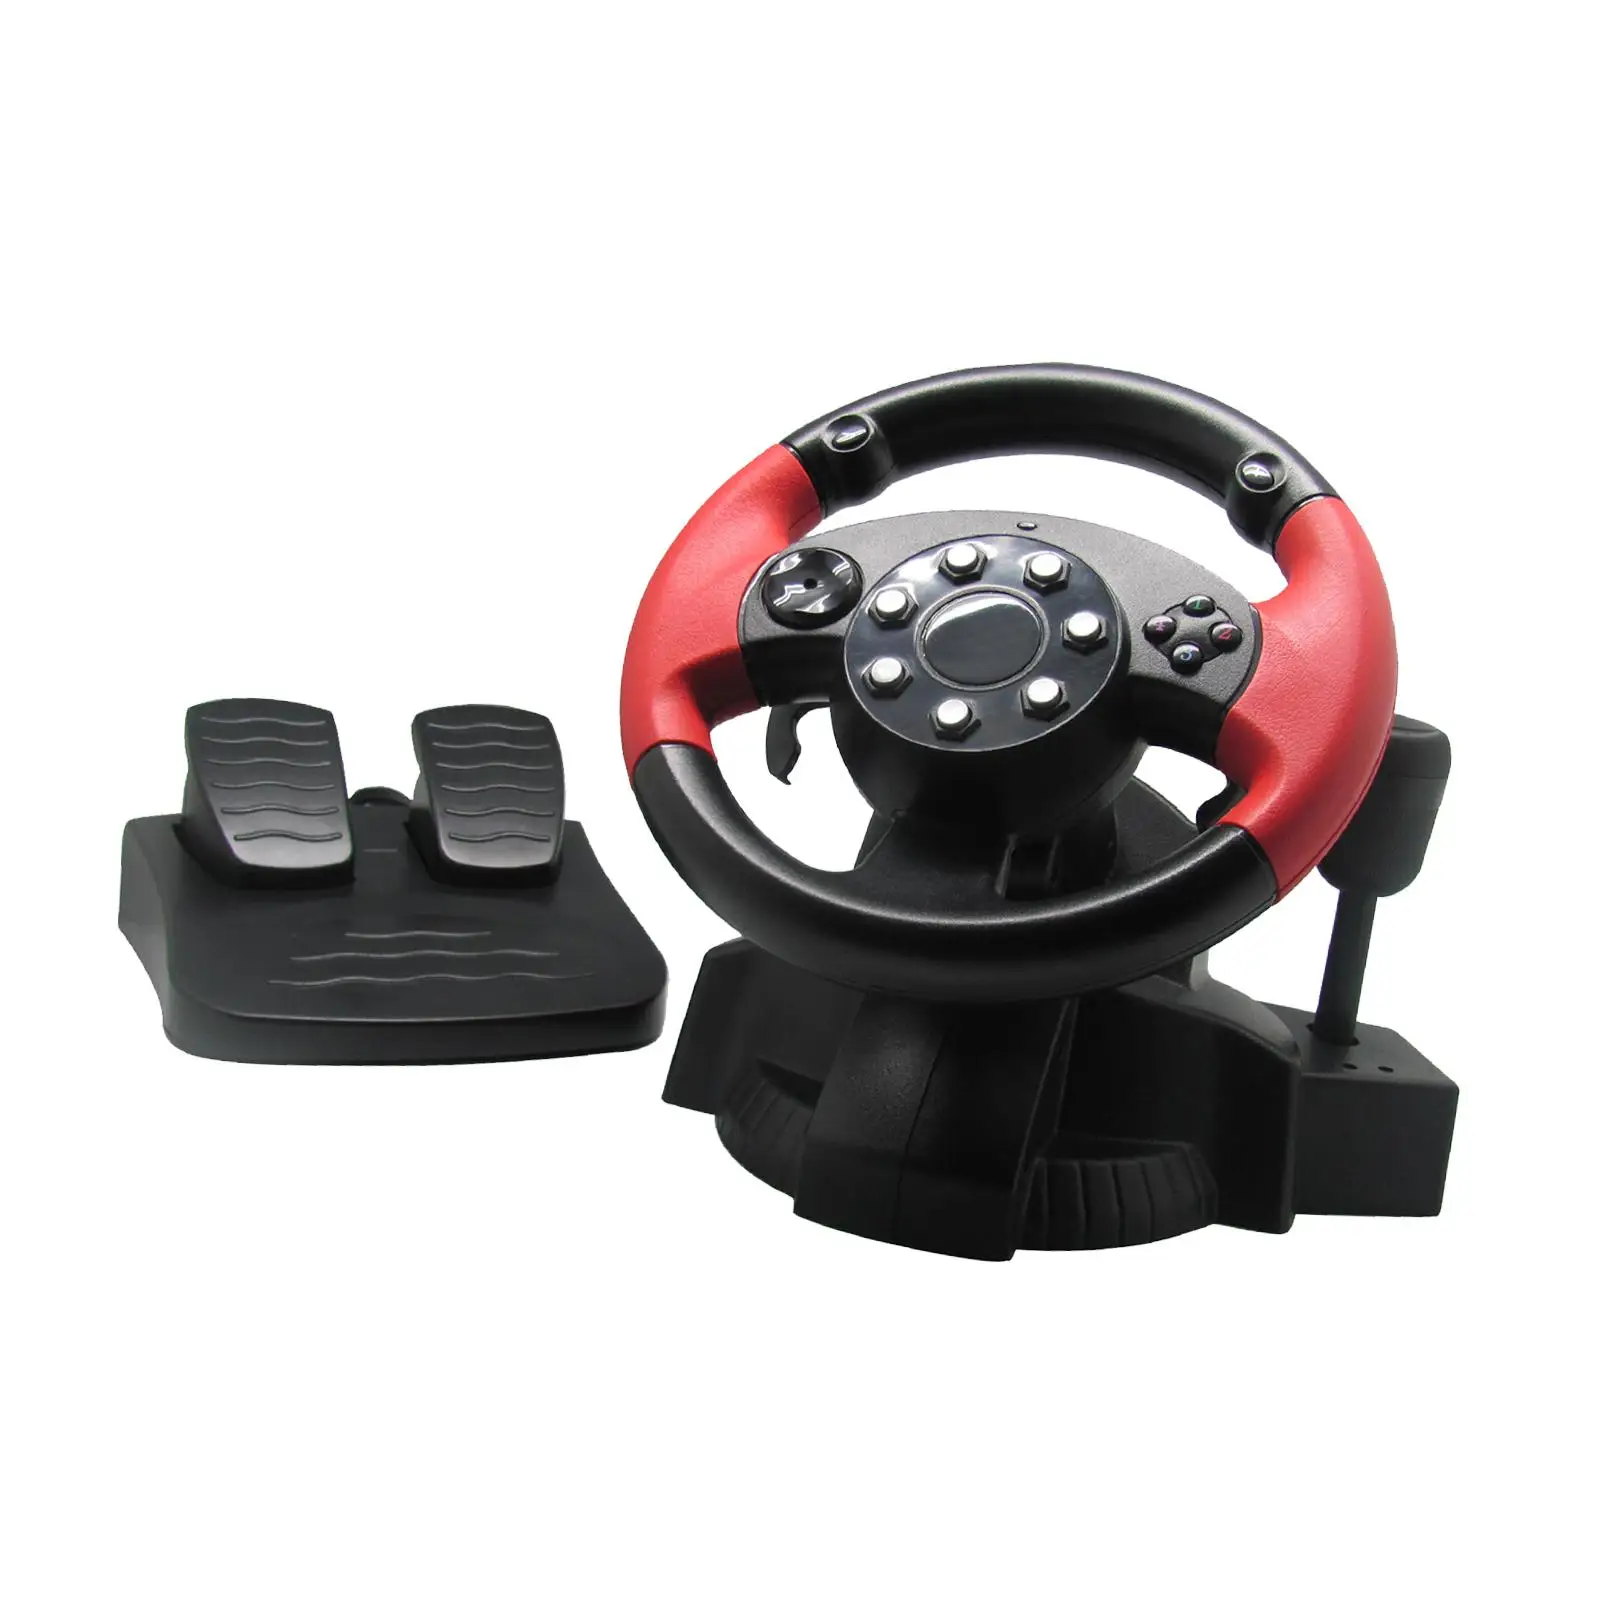 Racing Driving Wheel with Pedals and Shifter Game Racing Wheel Controller Wired Gaming Accessories Universal Pc Wheel